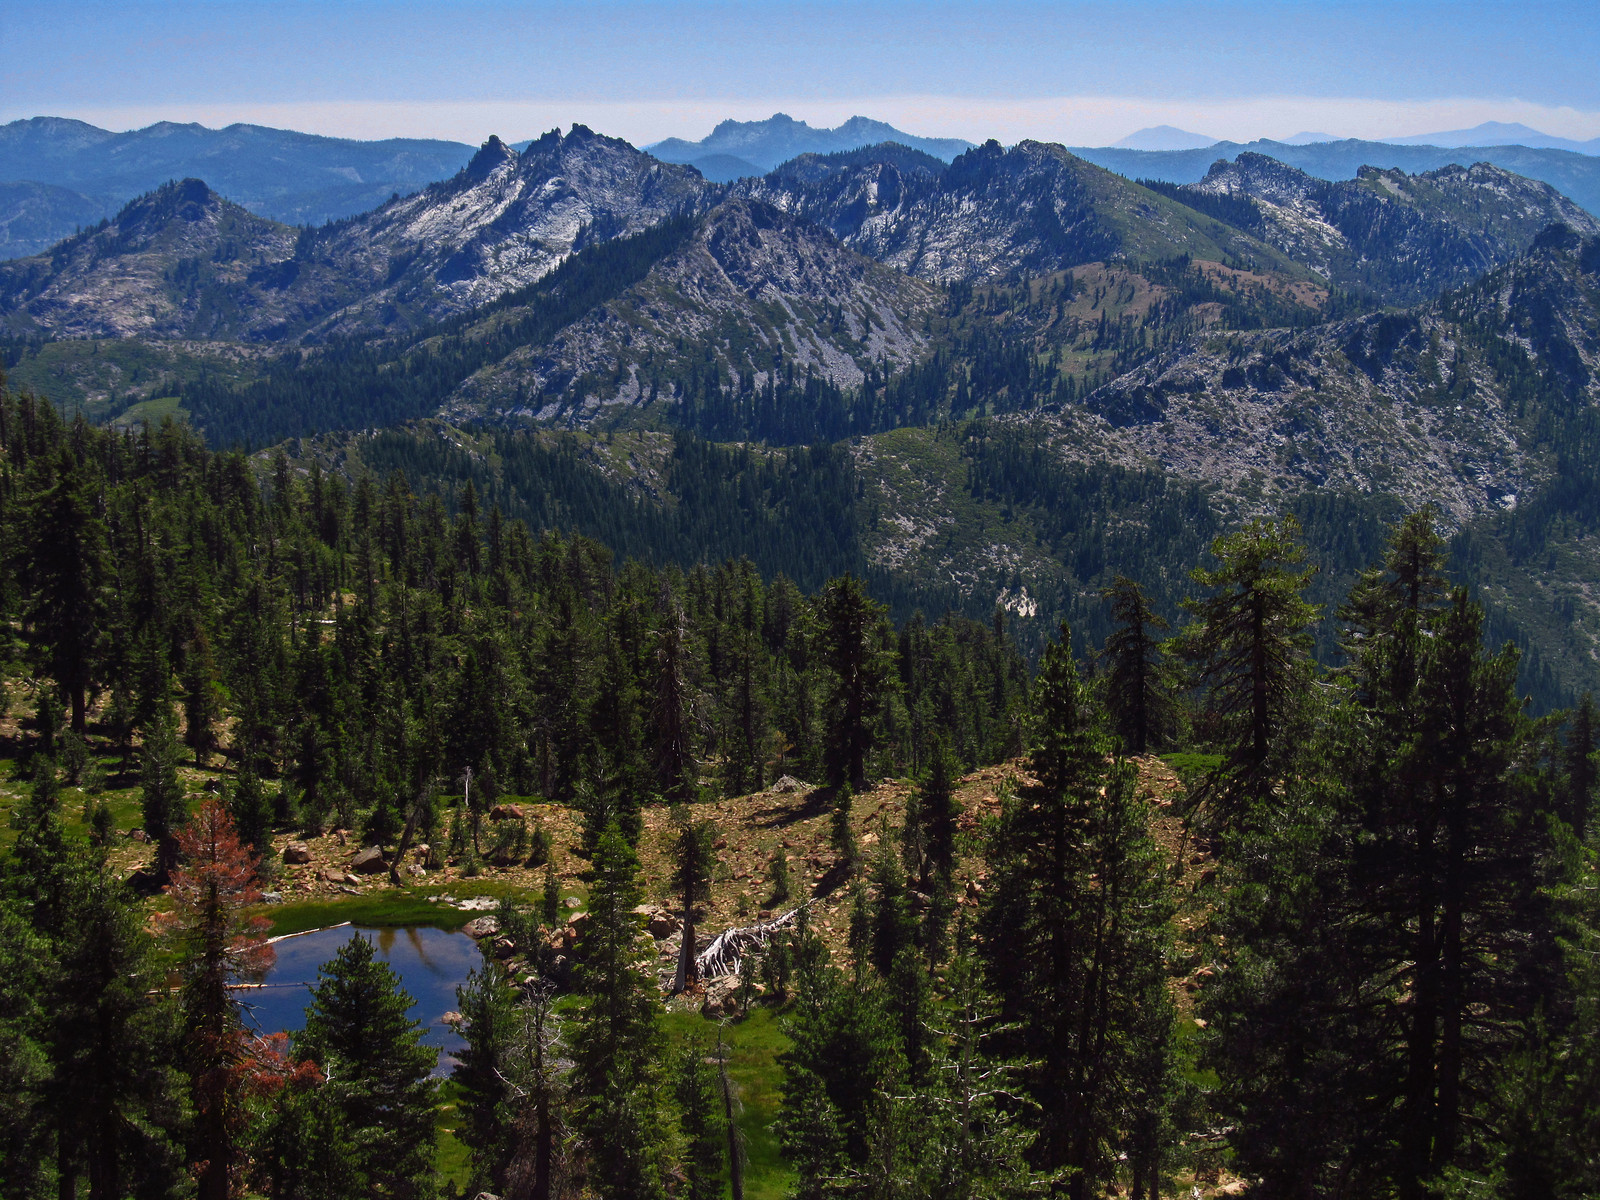 Grand views from the Pacific Crest Trail in far Northern California.